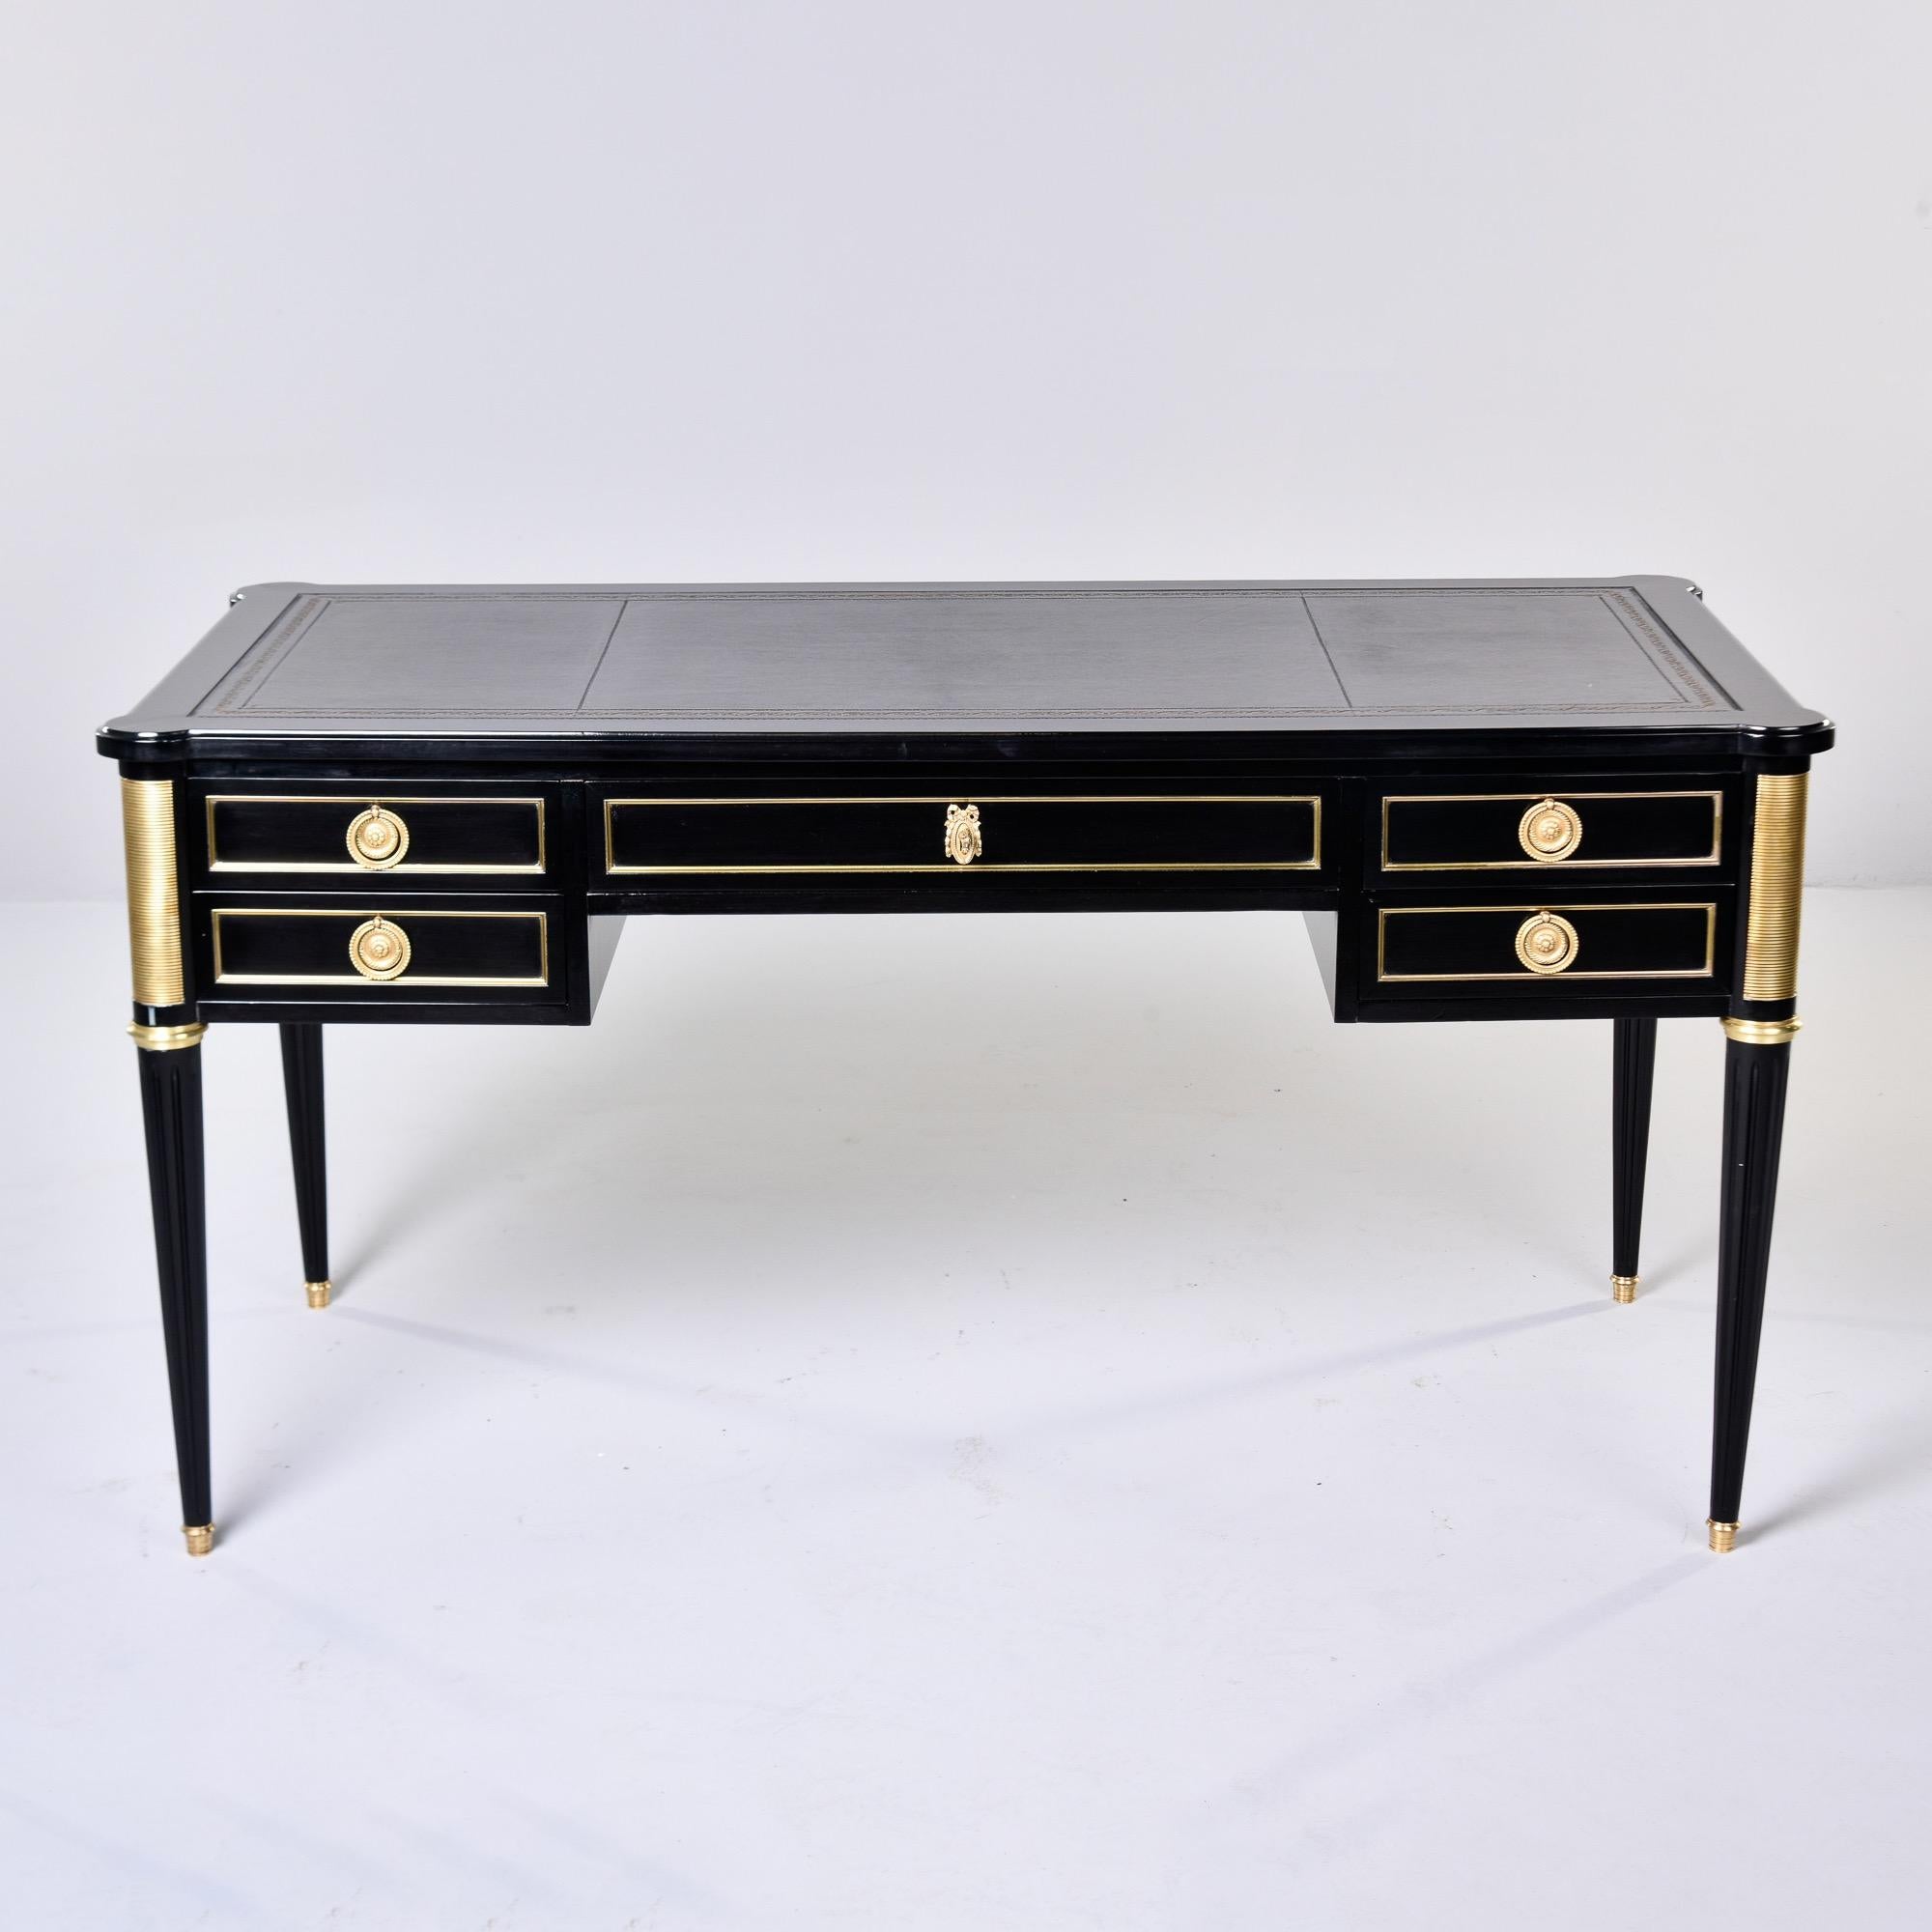 Found in France, this Louis XVI style desk dates from the 1880s. We had this mahogany desk professionally ebonised in Europe and the leather writing surfaces were also replaced. Locking top center drawer flanked on each side by two drawers. Dovetail